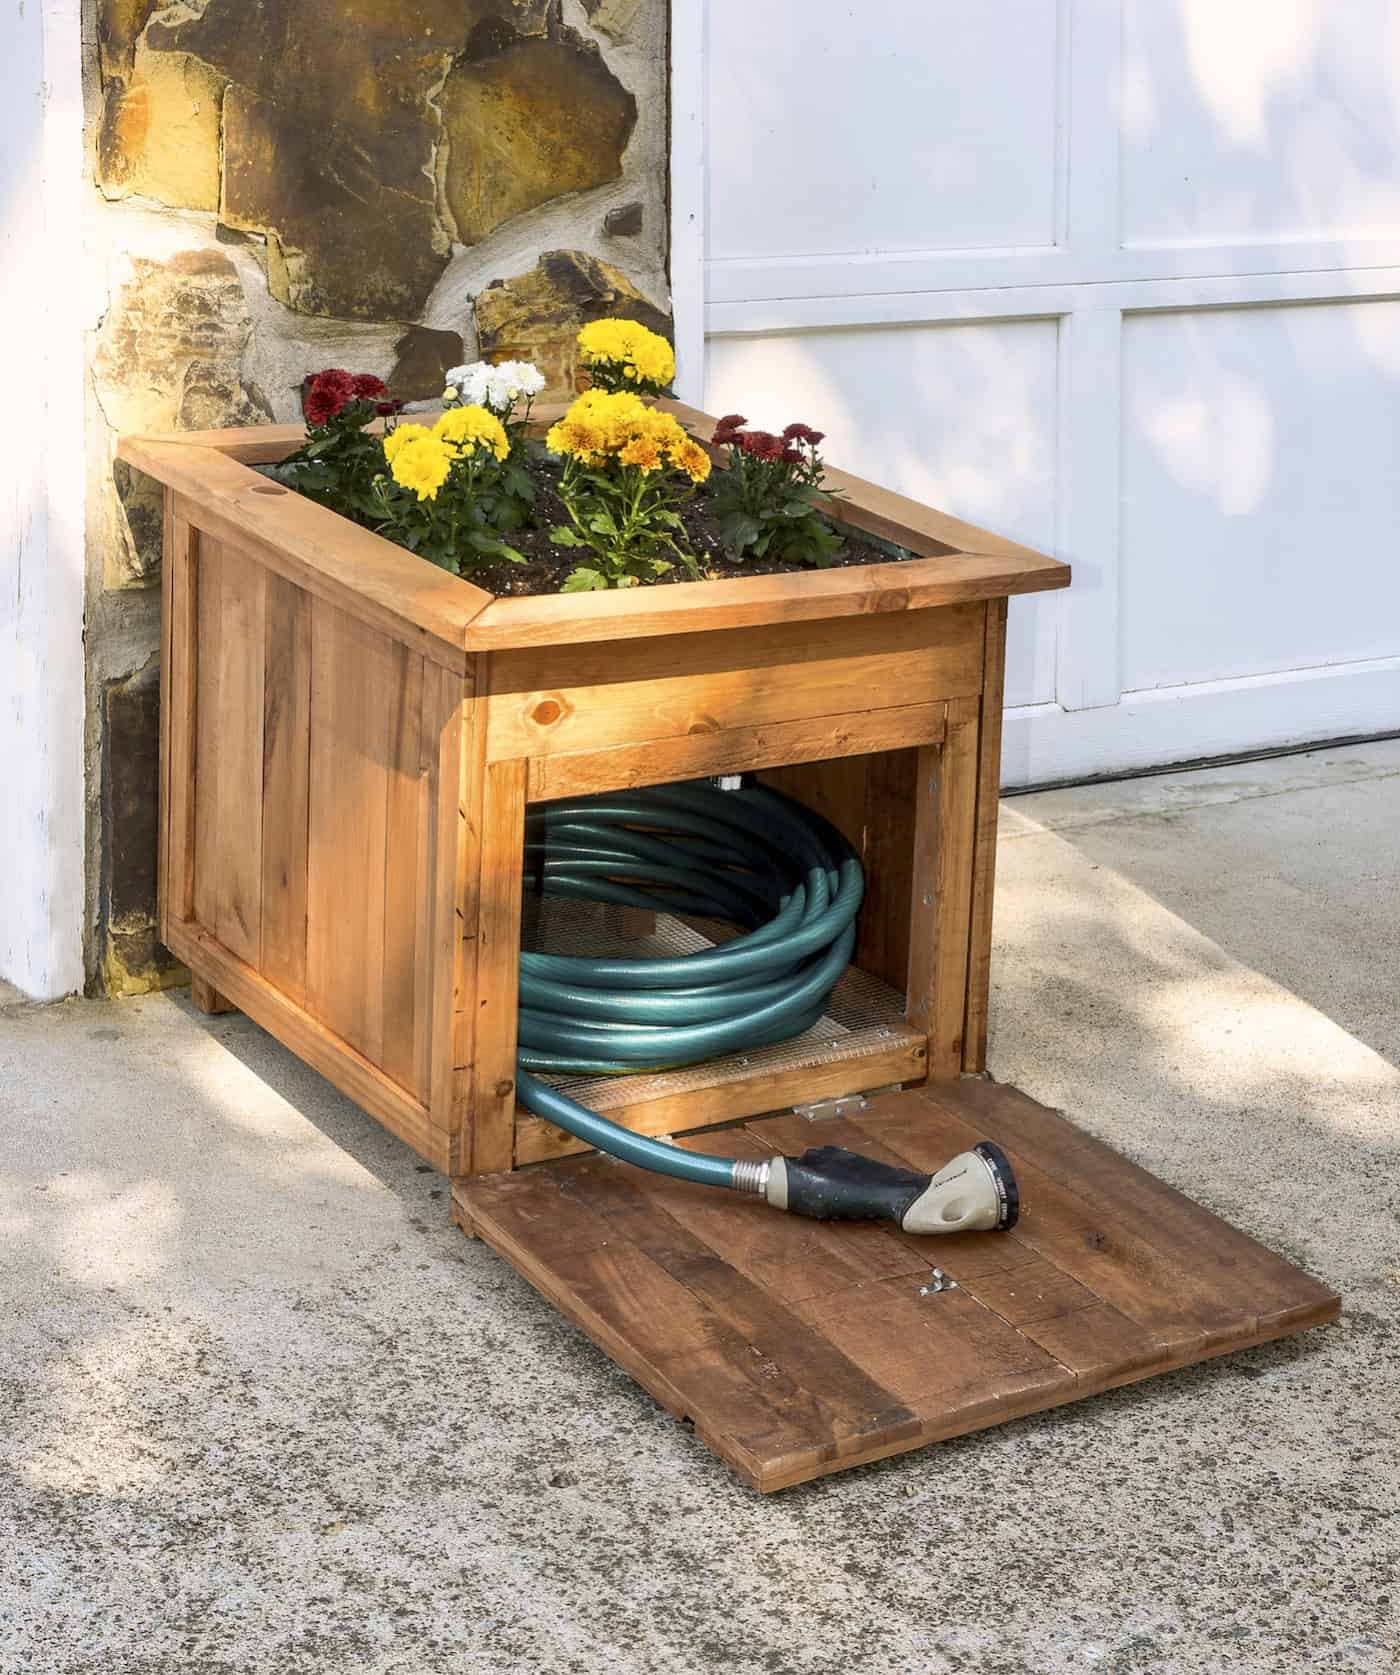 DIY Pallet Wood Hose Holder with Planter by DIY Candy